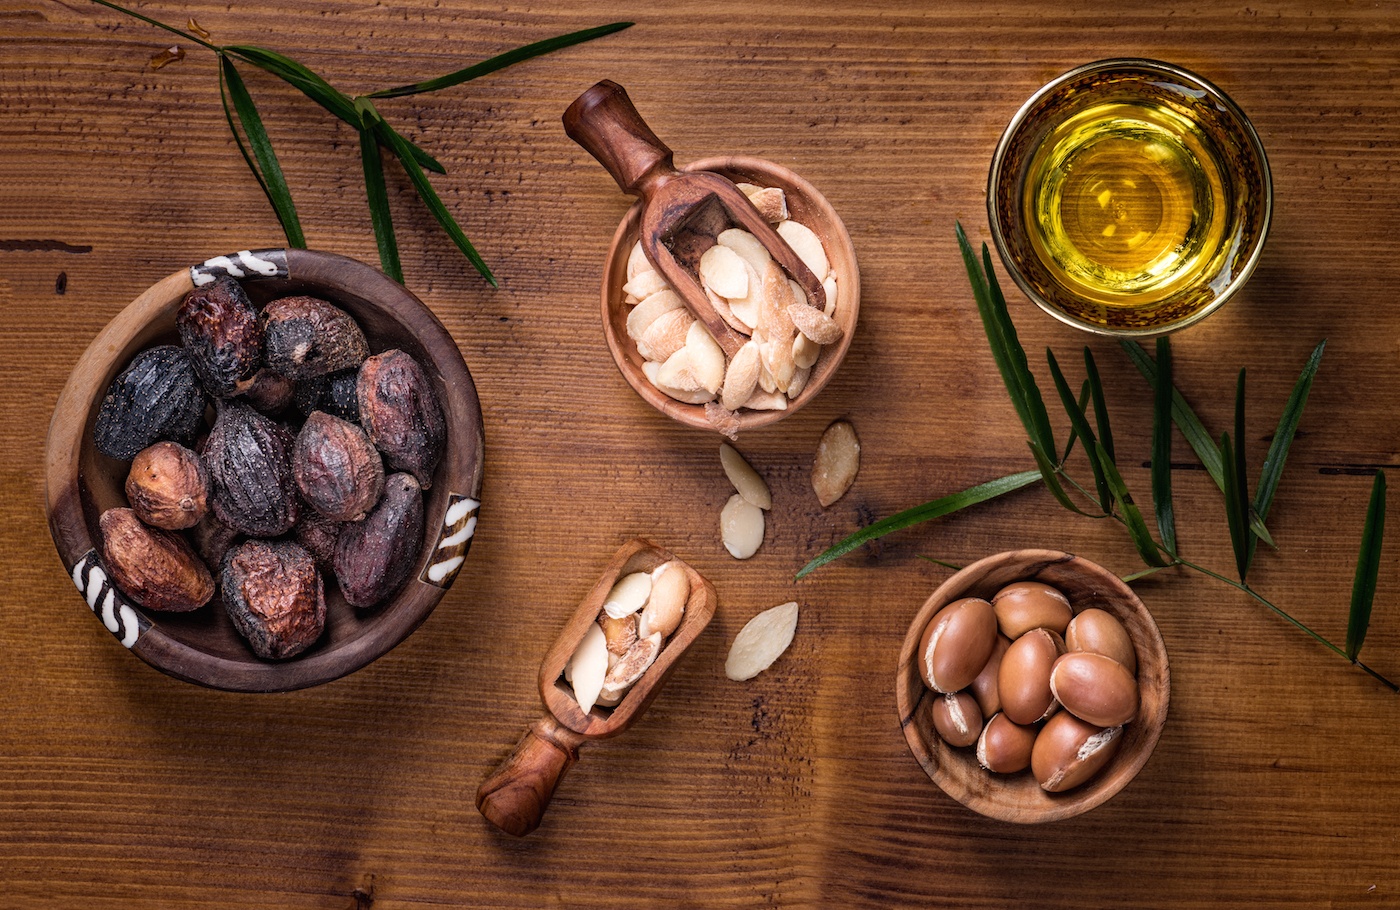 soap nuts in wooden bowls with plants and oil as an example of how to use soap nuts